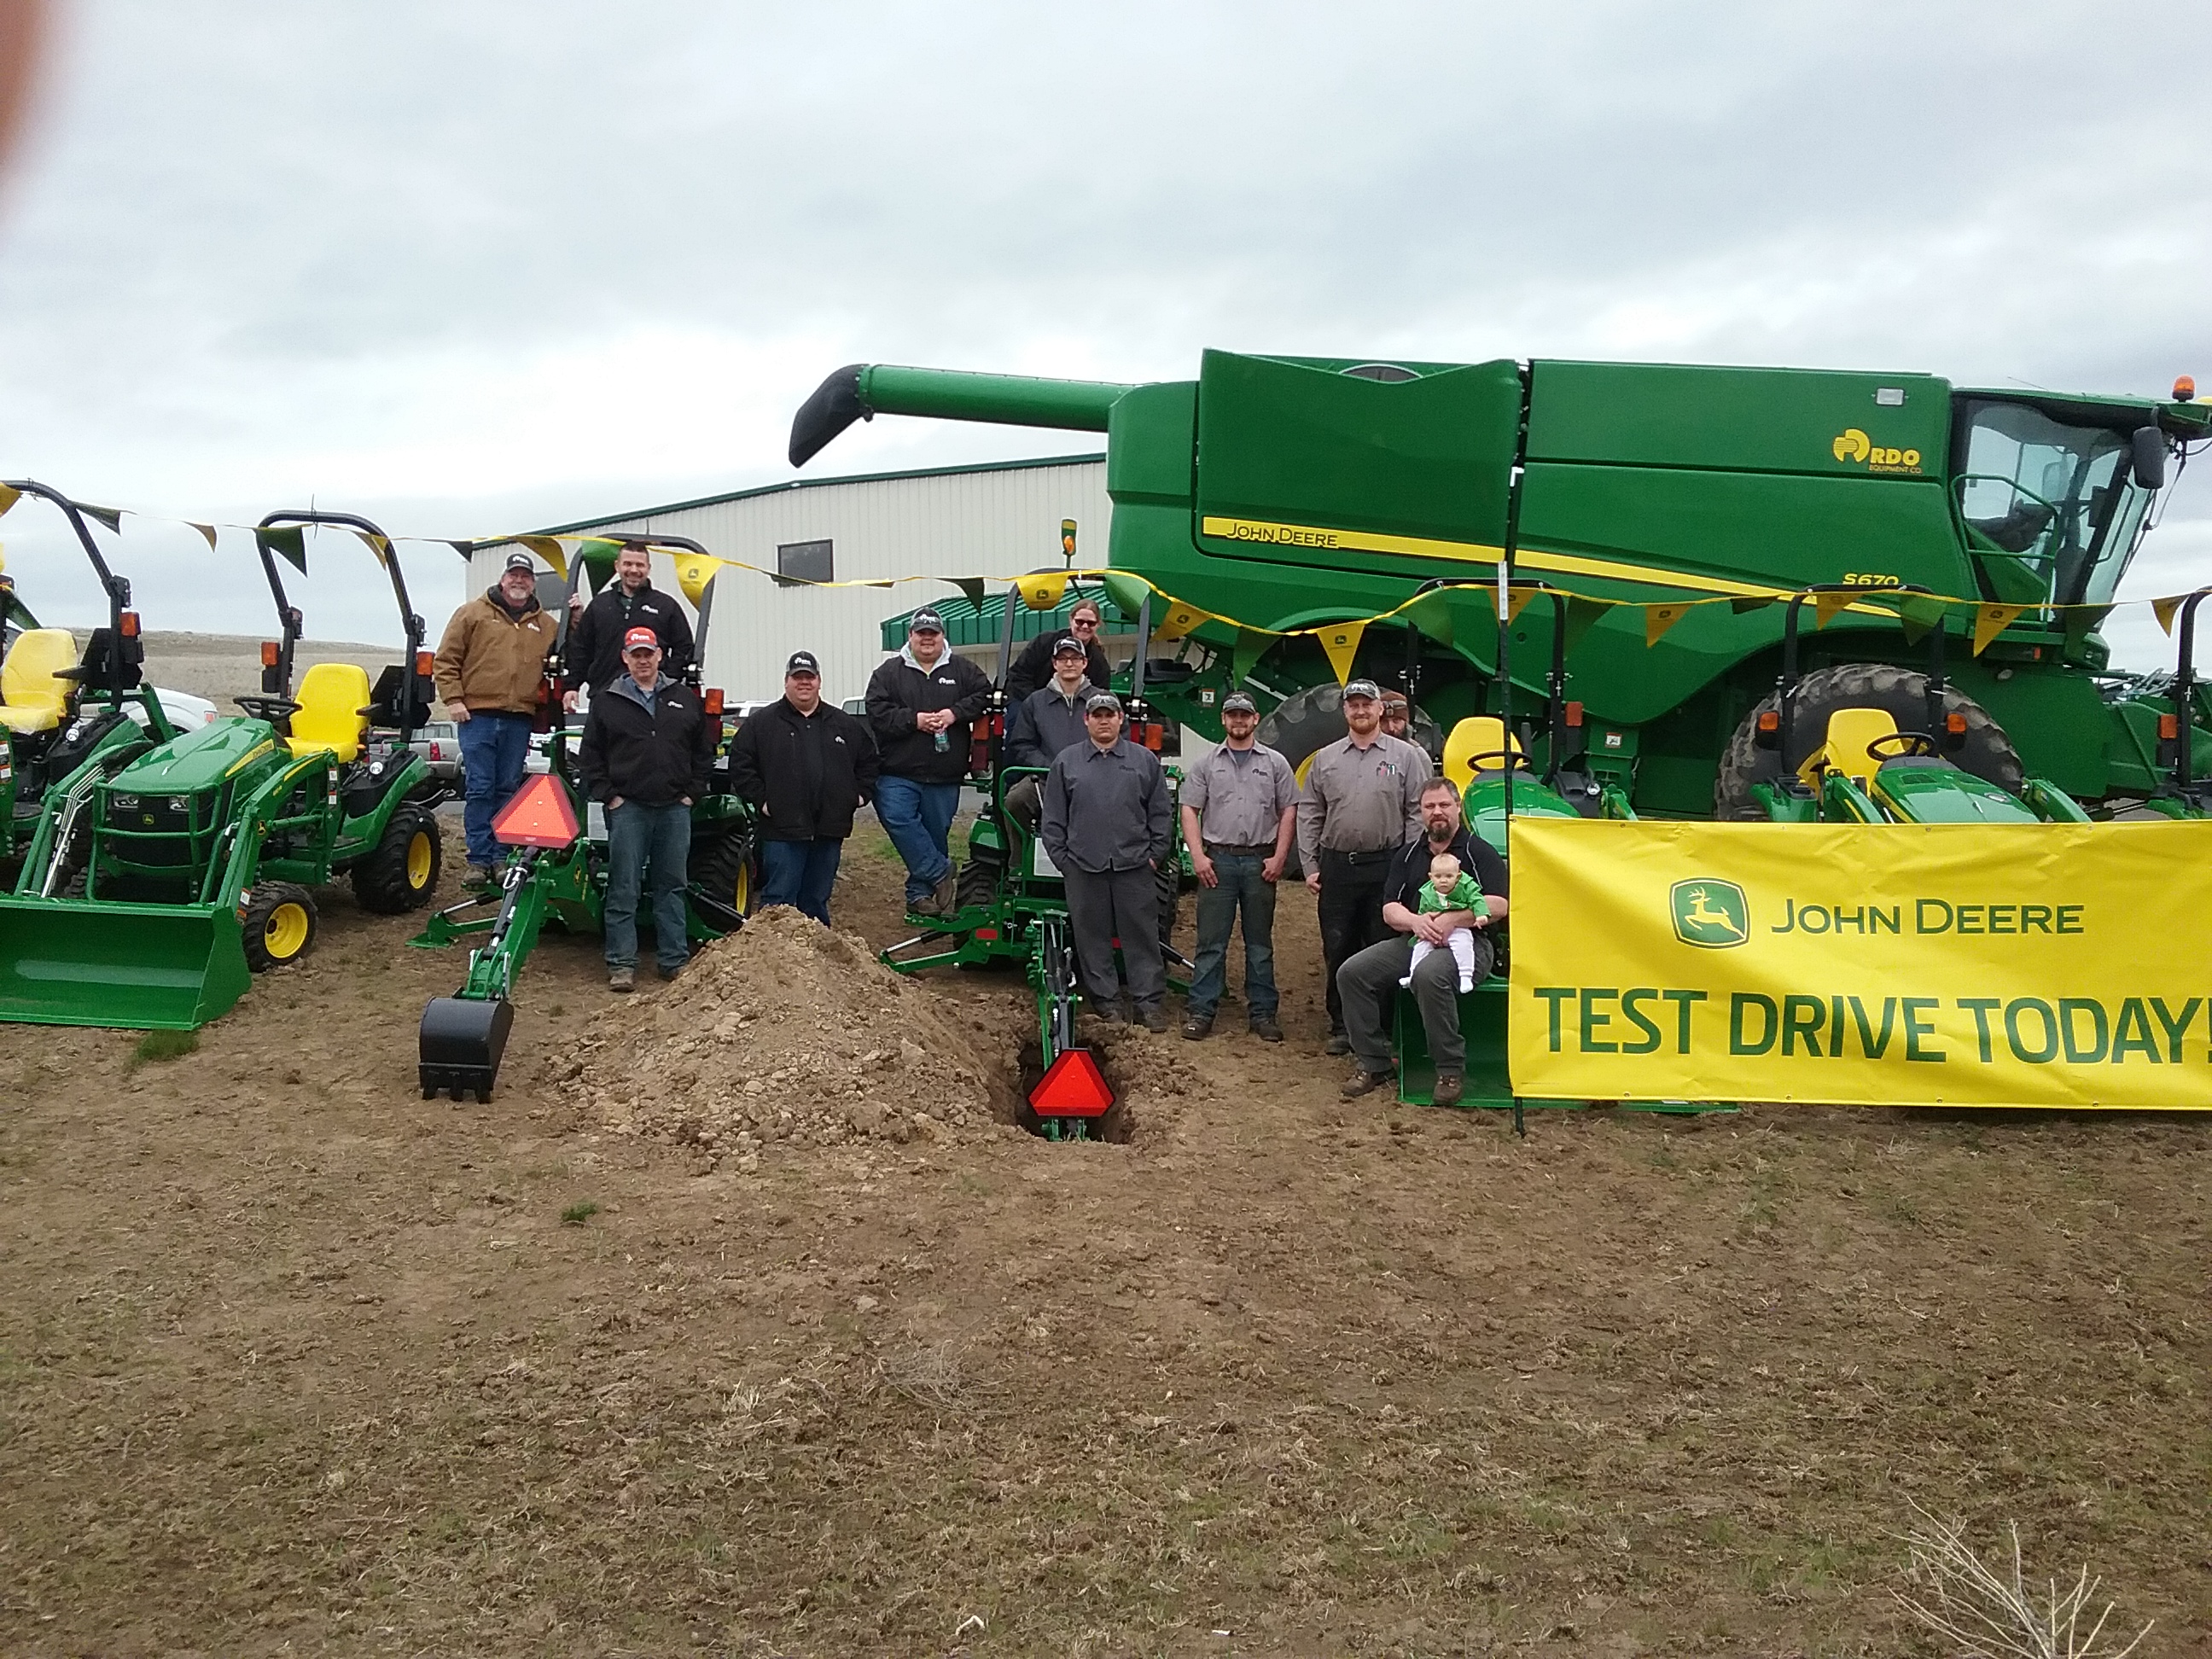 RDO Equipment Co. Group Photo in Wasco, OR